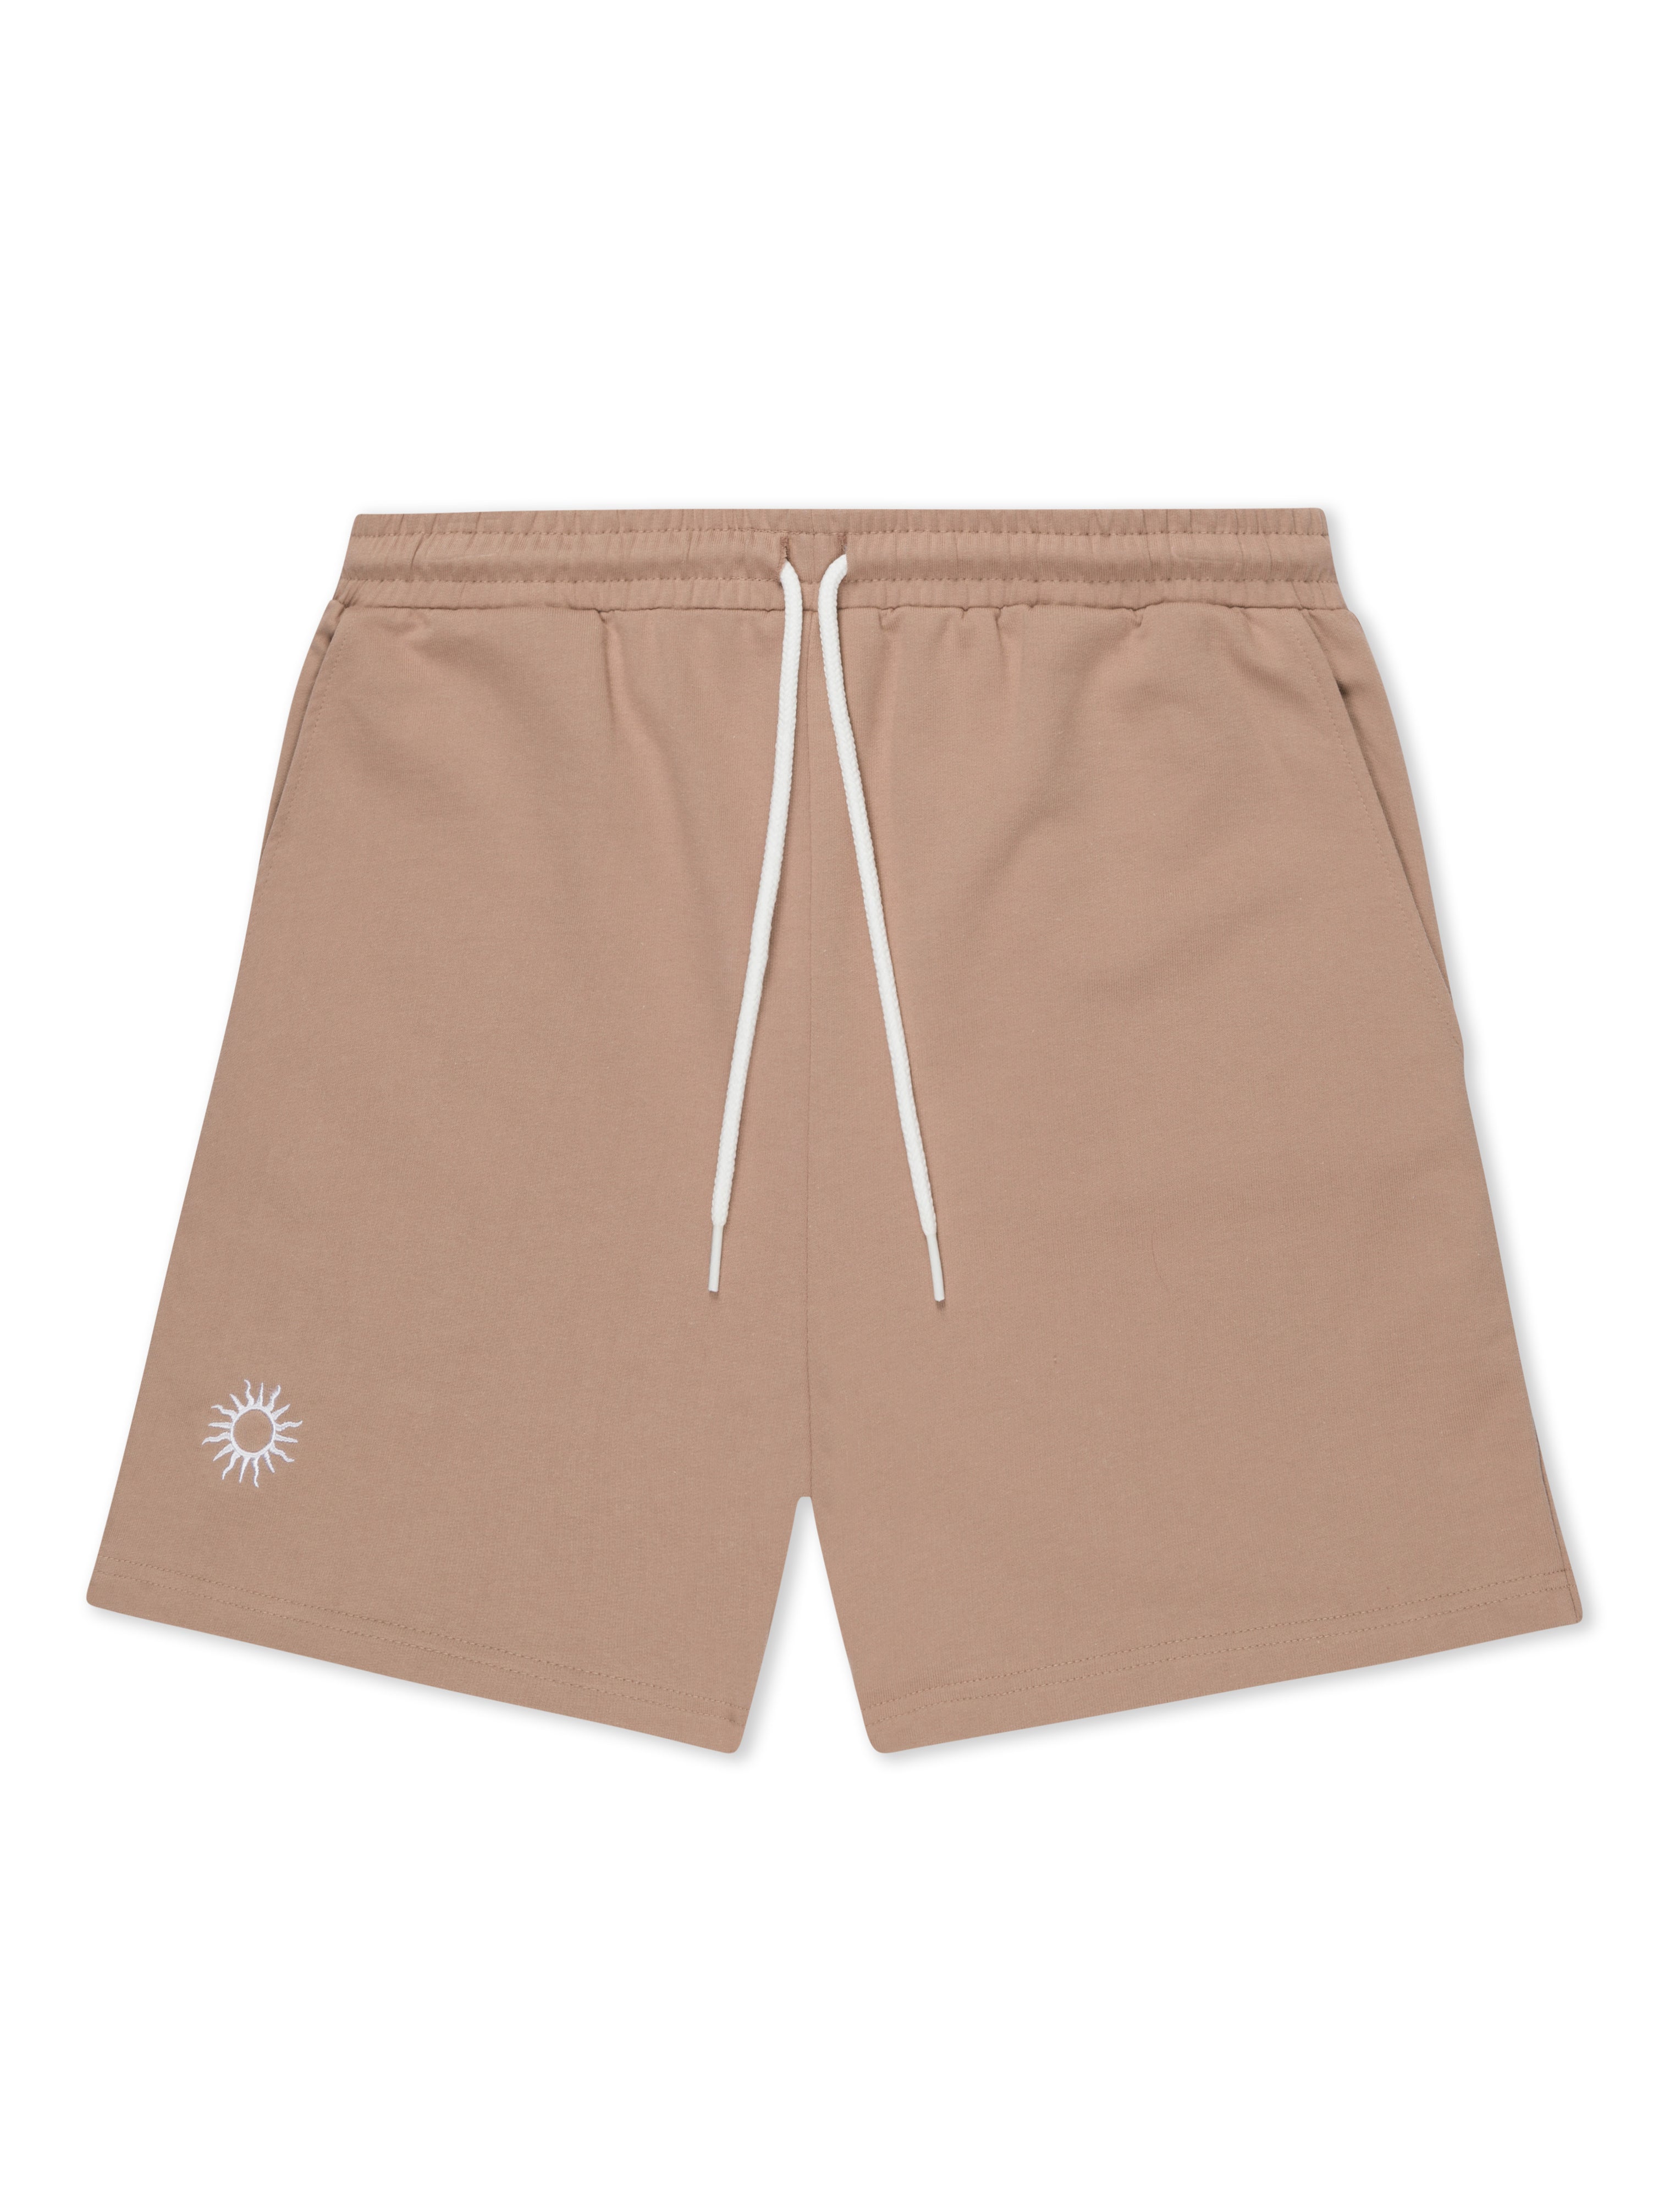 tan coloured 100% cotton gym shorts with pockets, white drawstrings and white embroidered sun logo